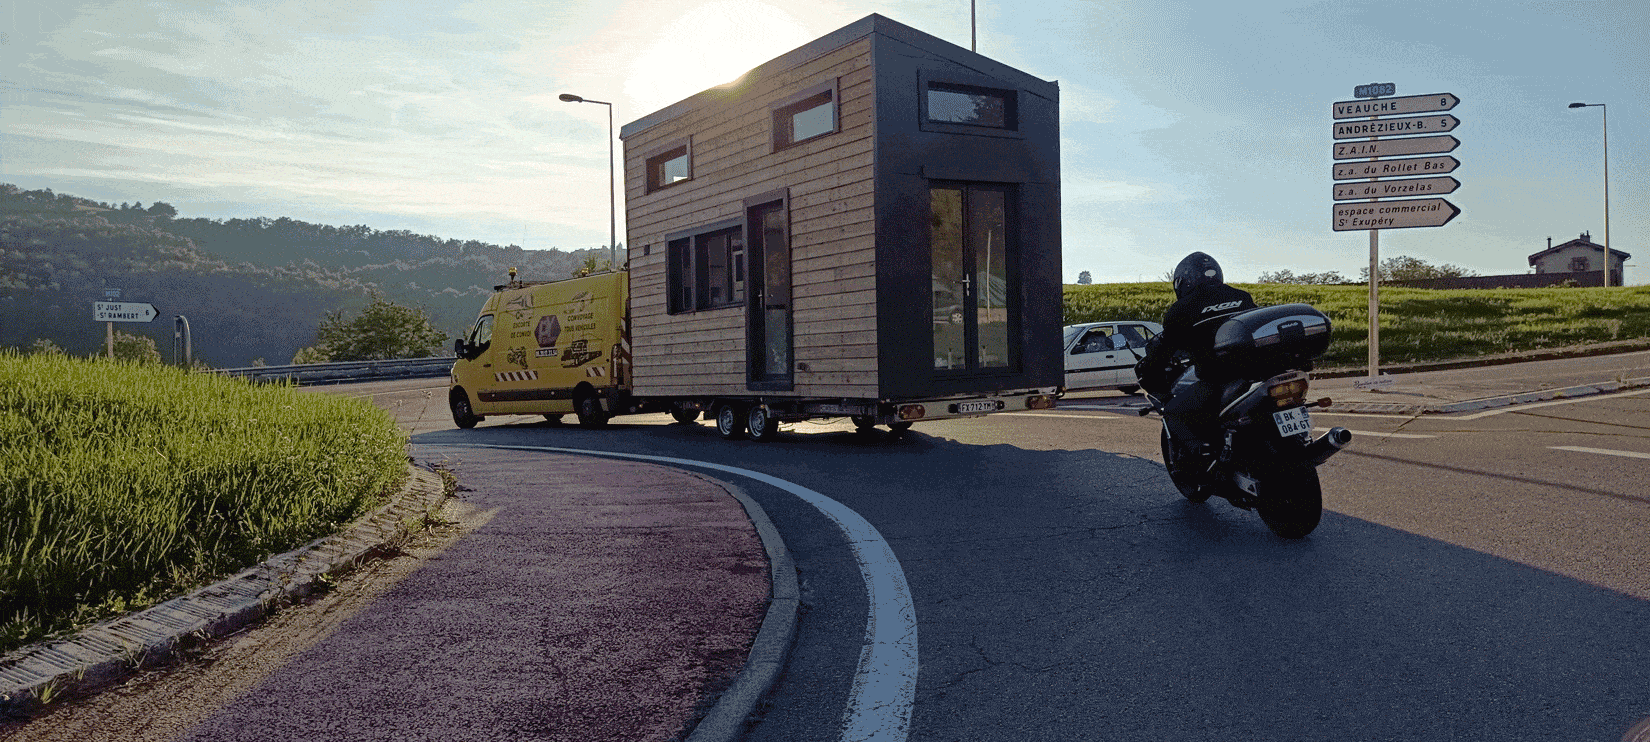 Multi Tiny, des Tiny Houses made in Loire